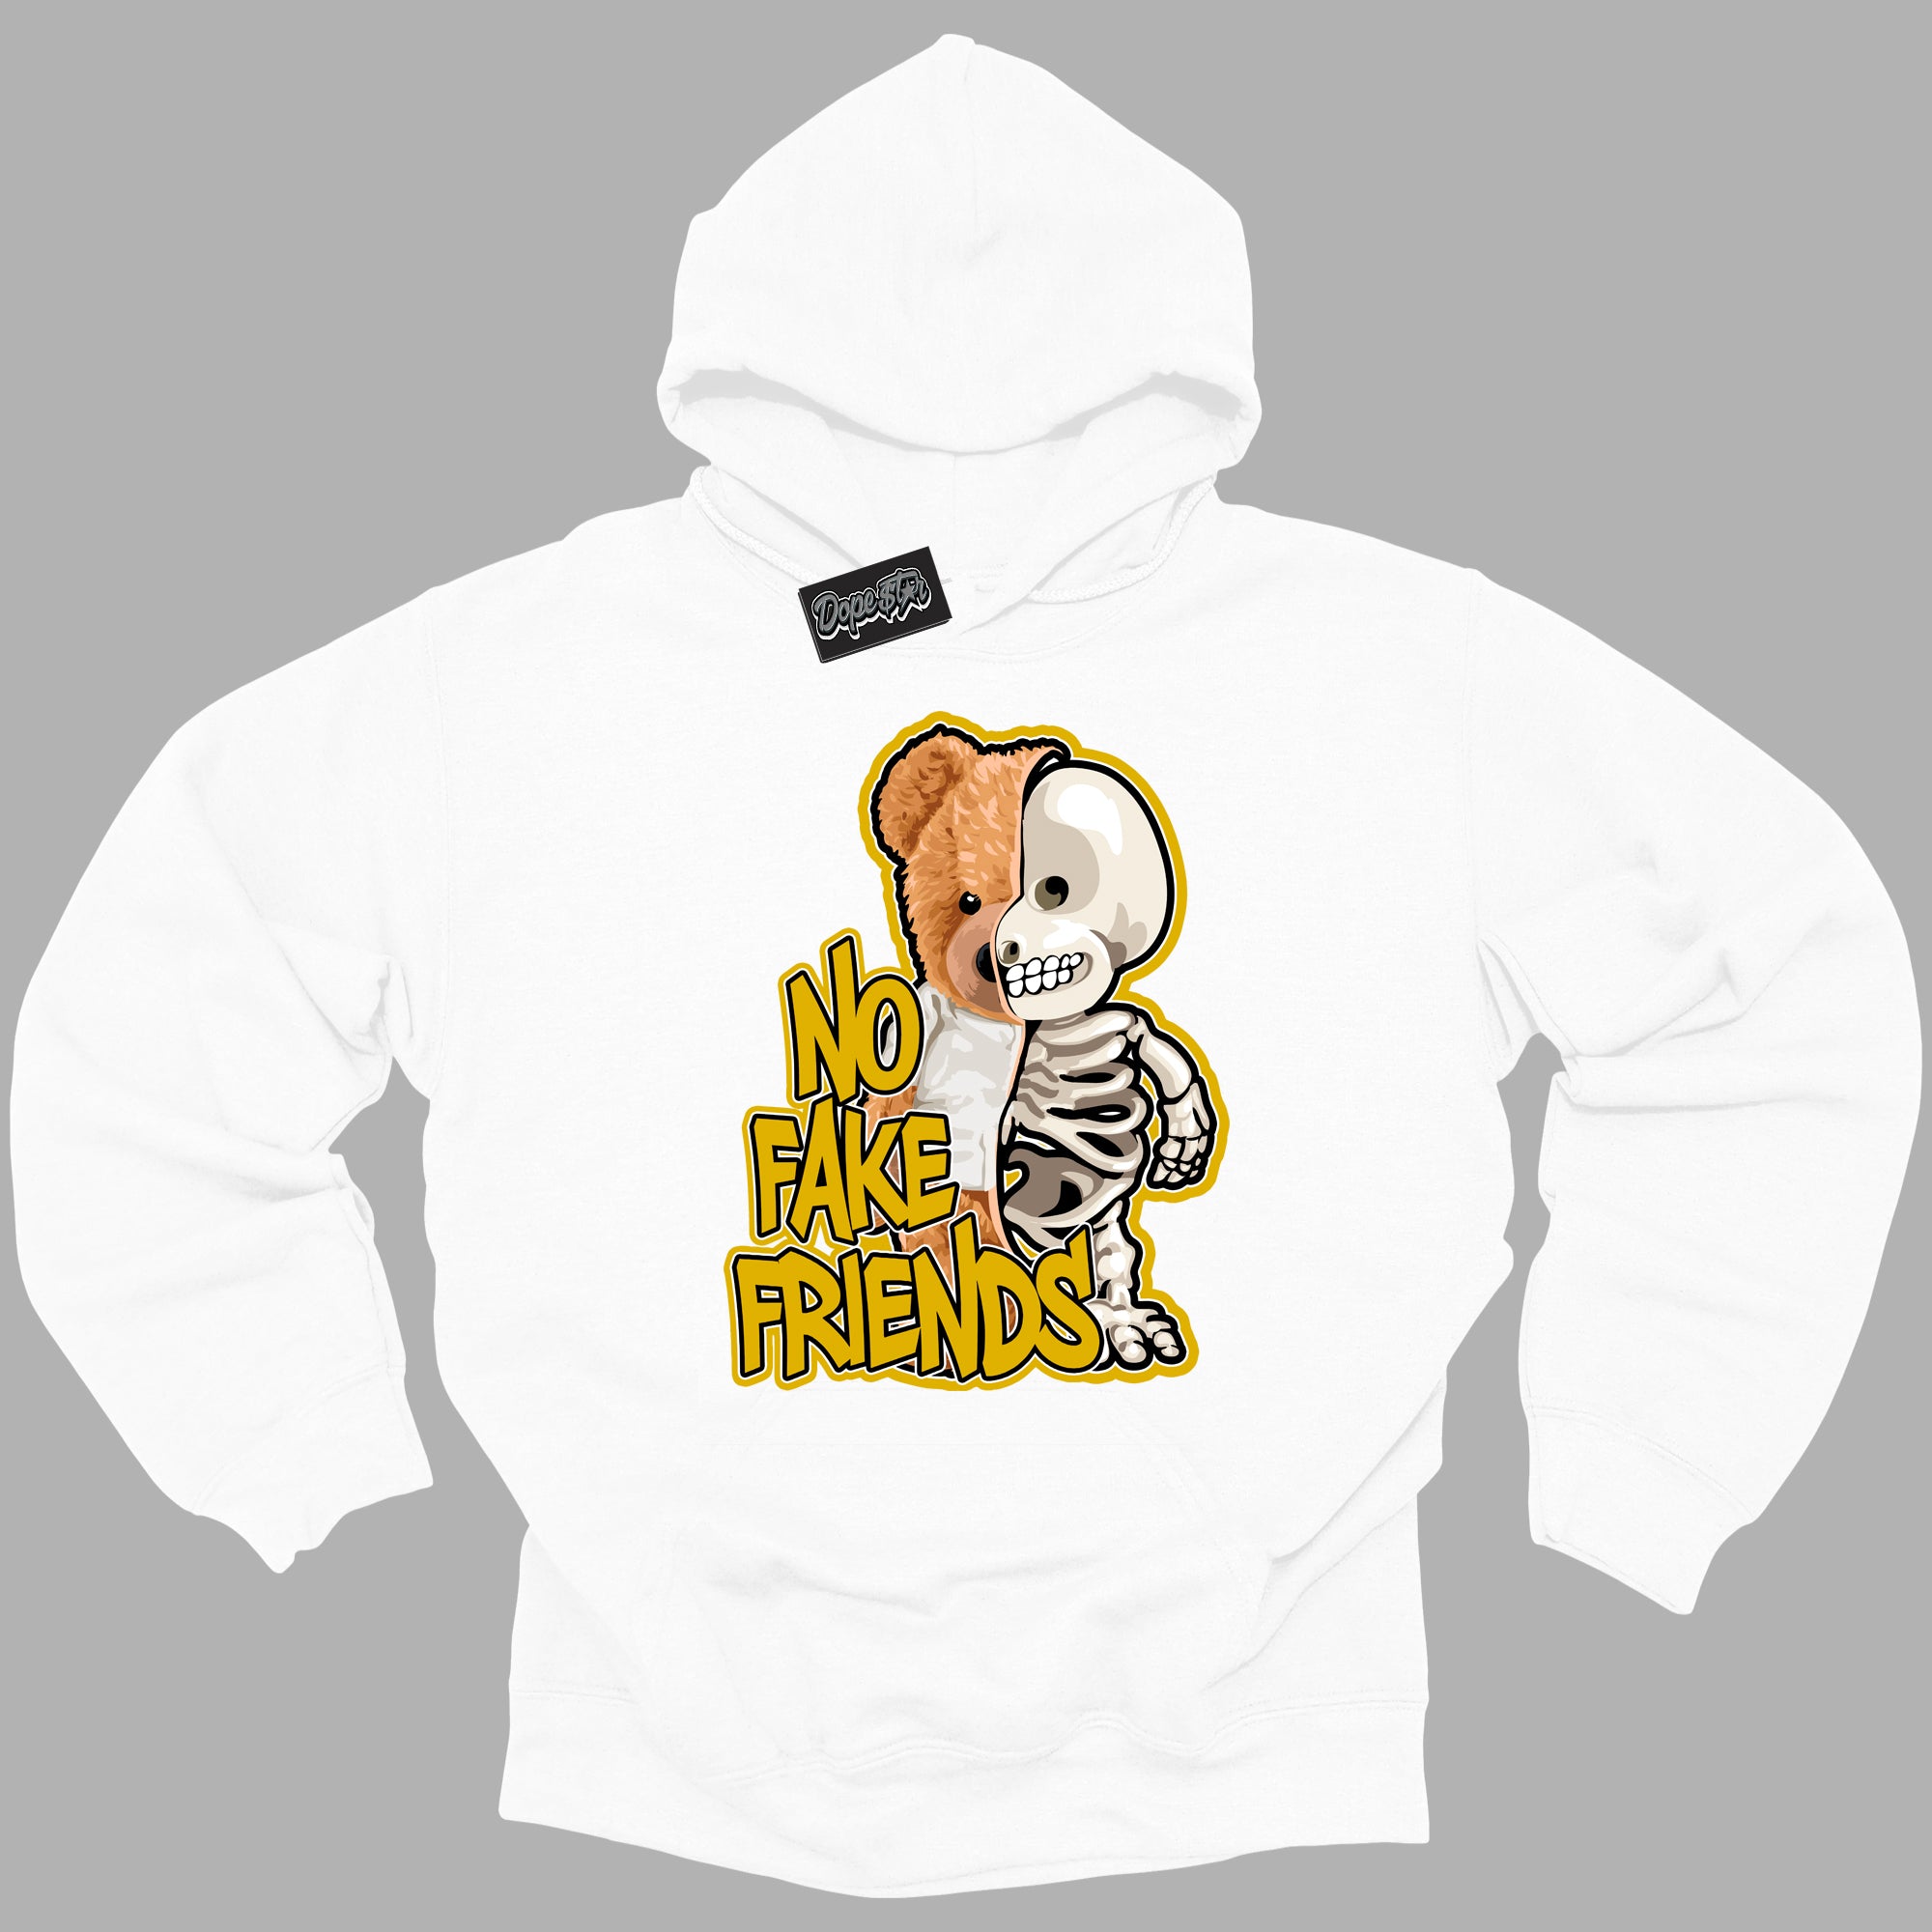 Cool White Hoodie with “ No Fake Friends ”  design that Perfectly Matches Yellow Ochre 6s Sneakers.